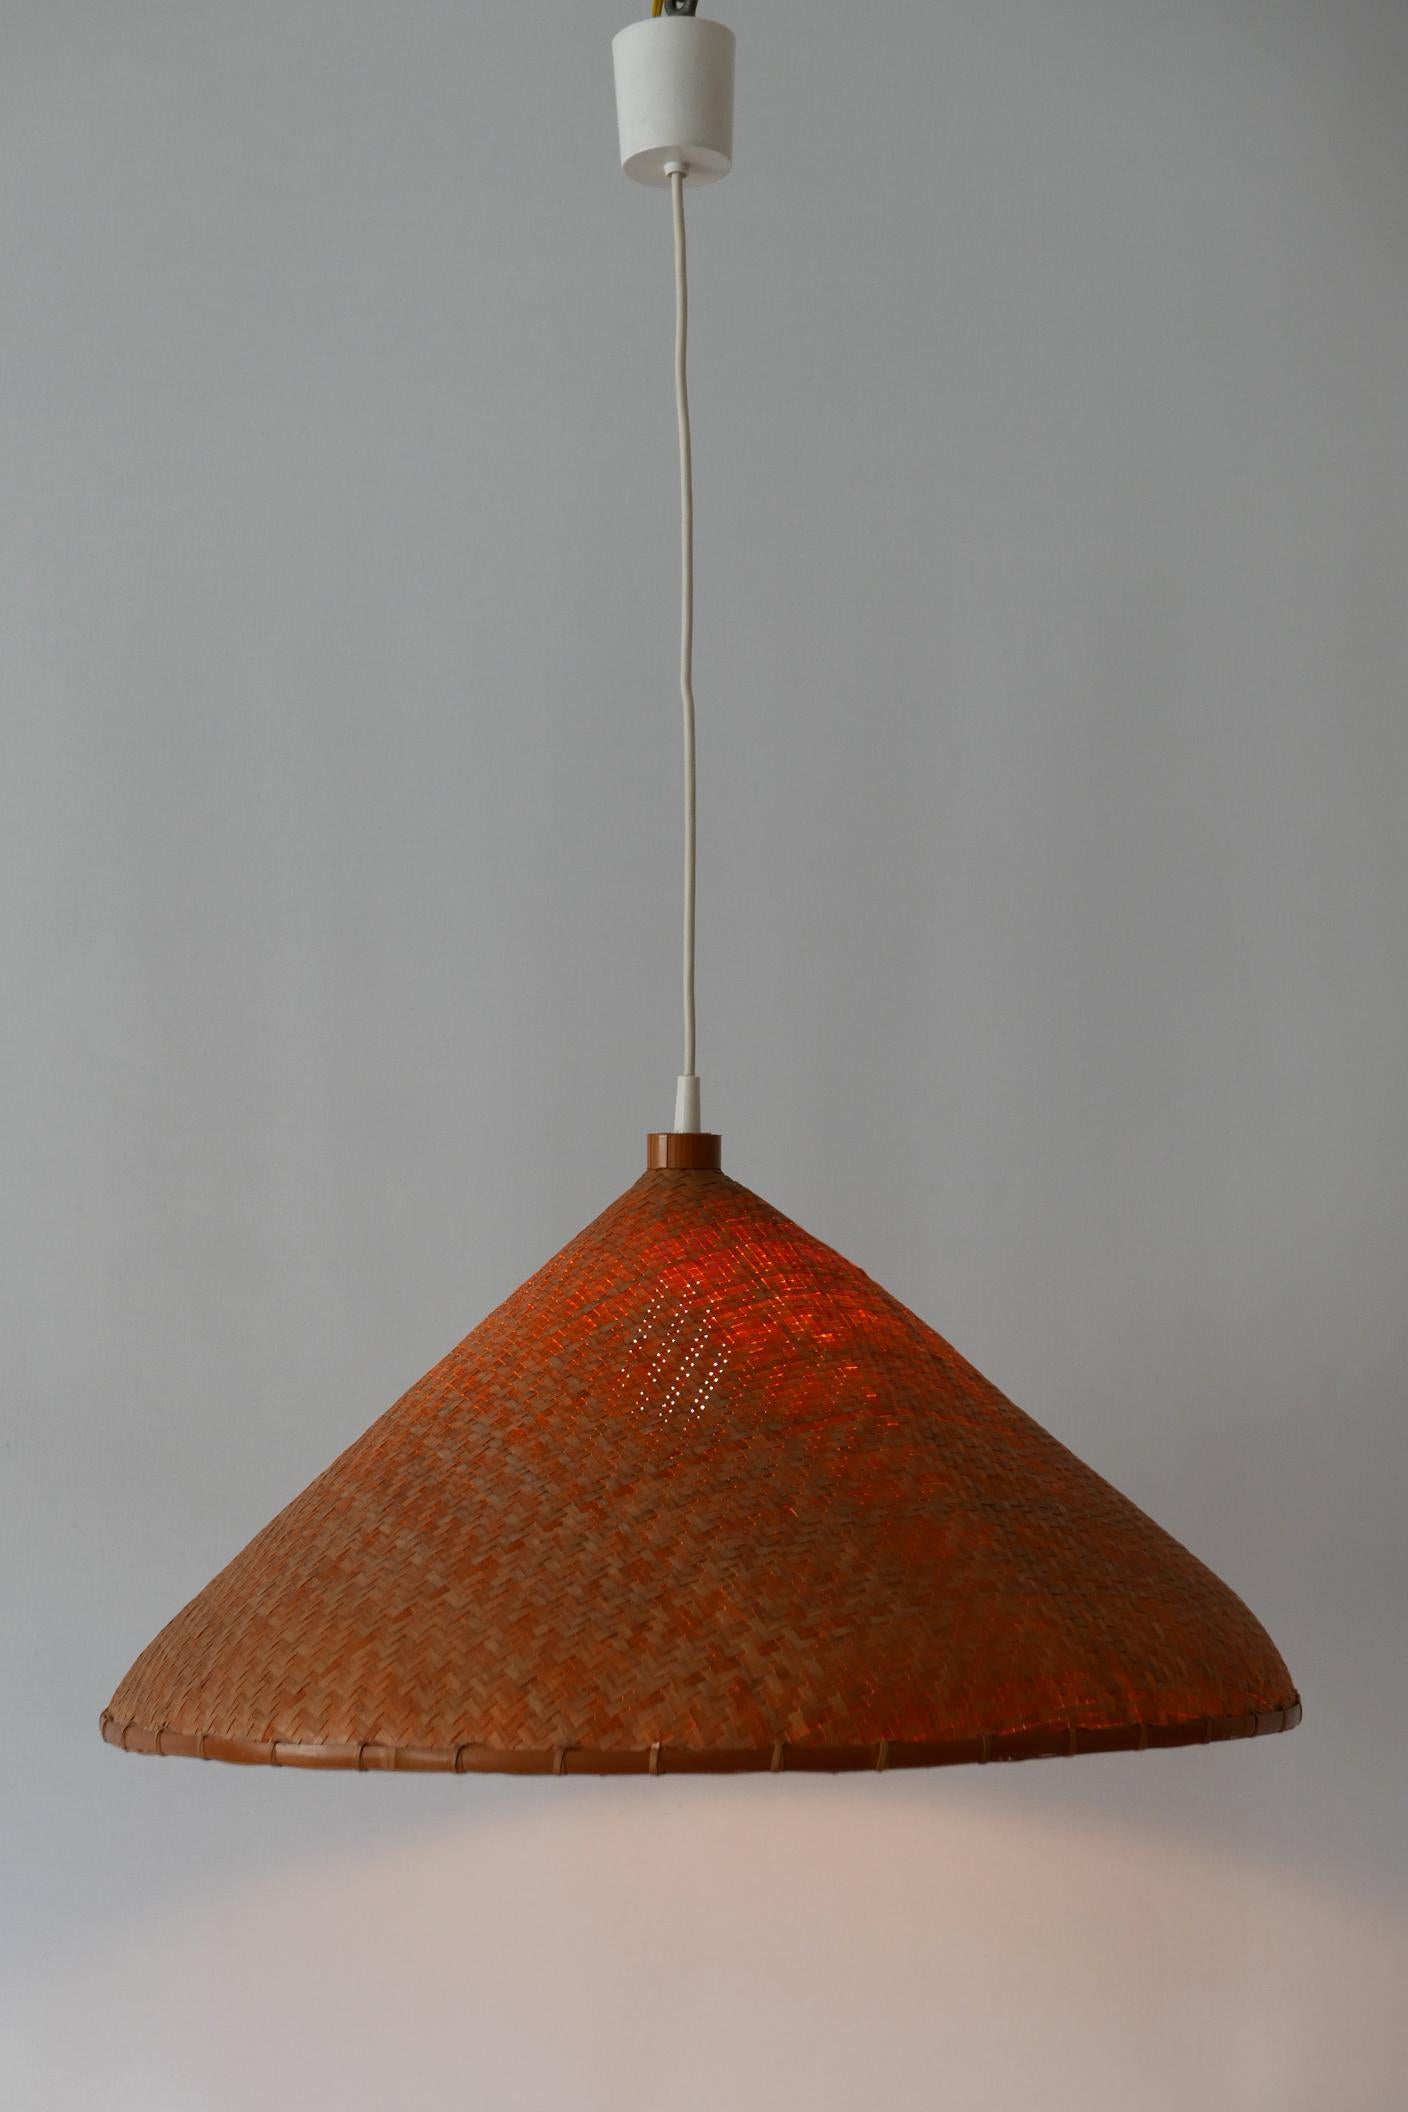 Large Mid-Century Modern Wicker Pendant Lamp or Hanging Light, Germany, 1960s For Sale 8